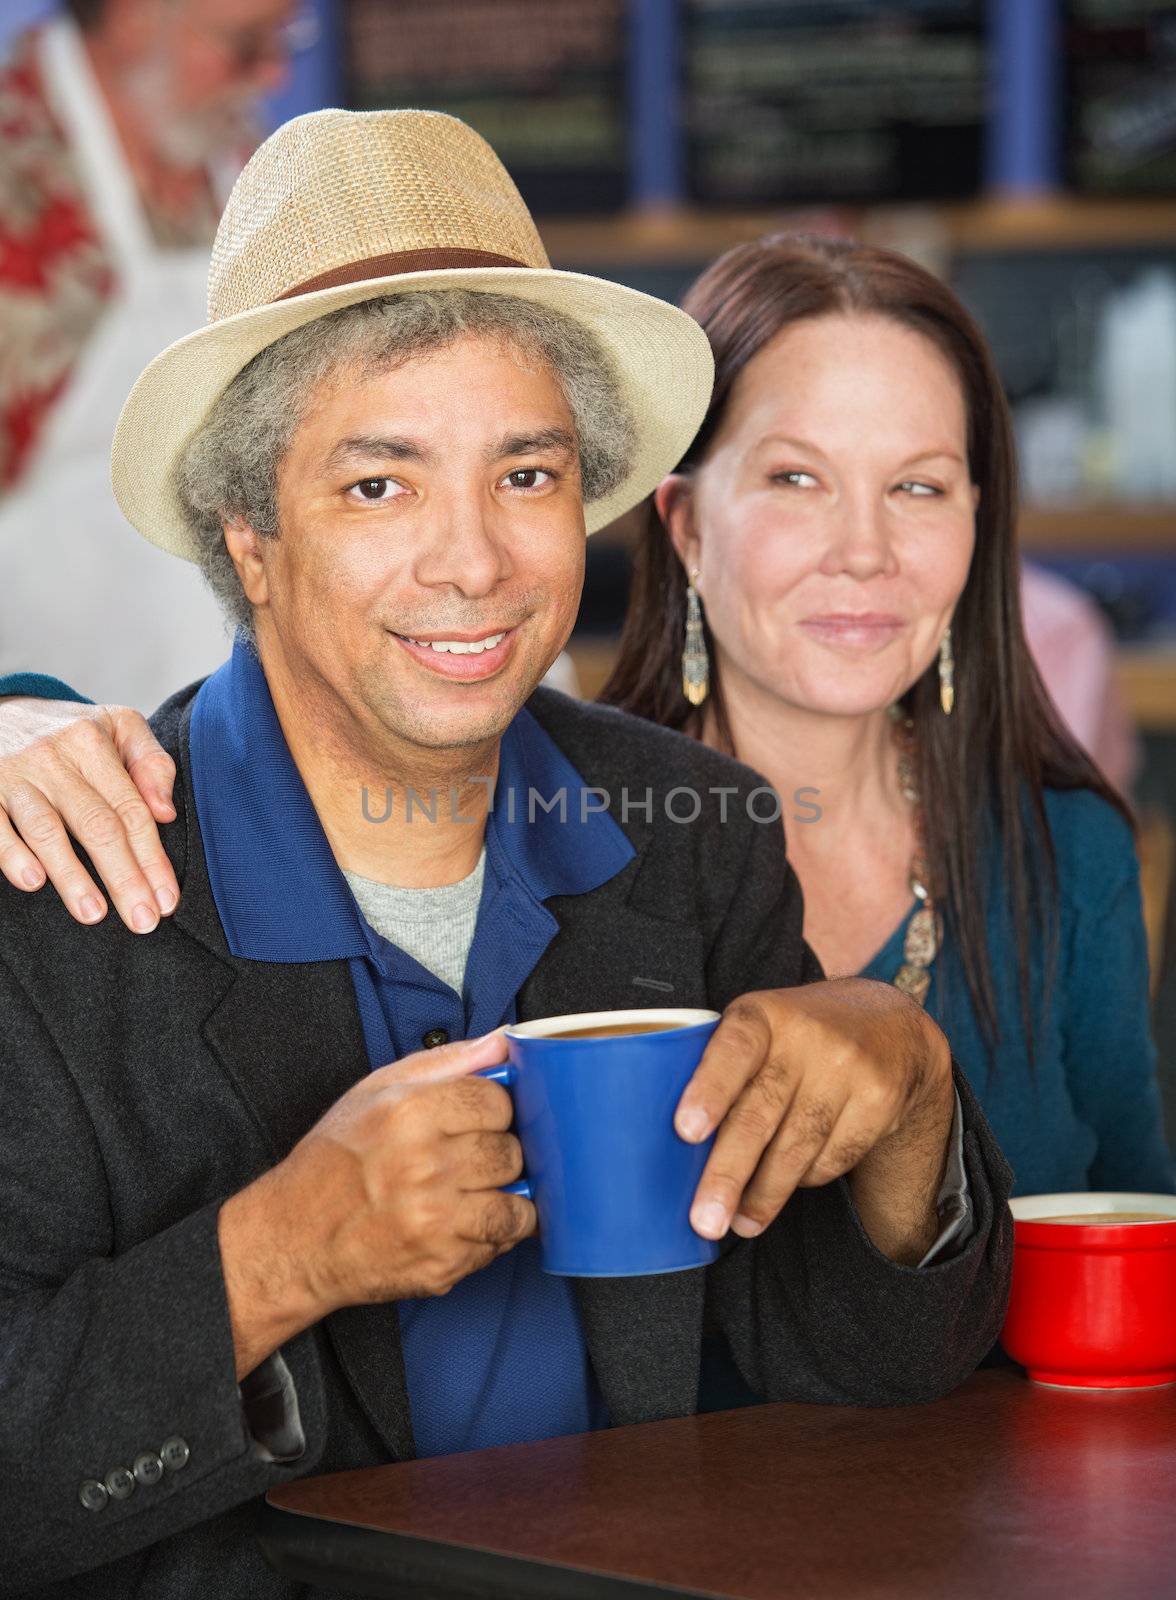 Smiling mixed couple together in coffee house